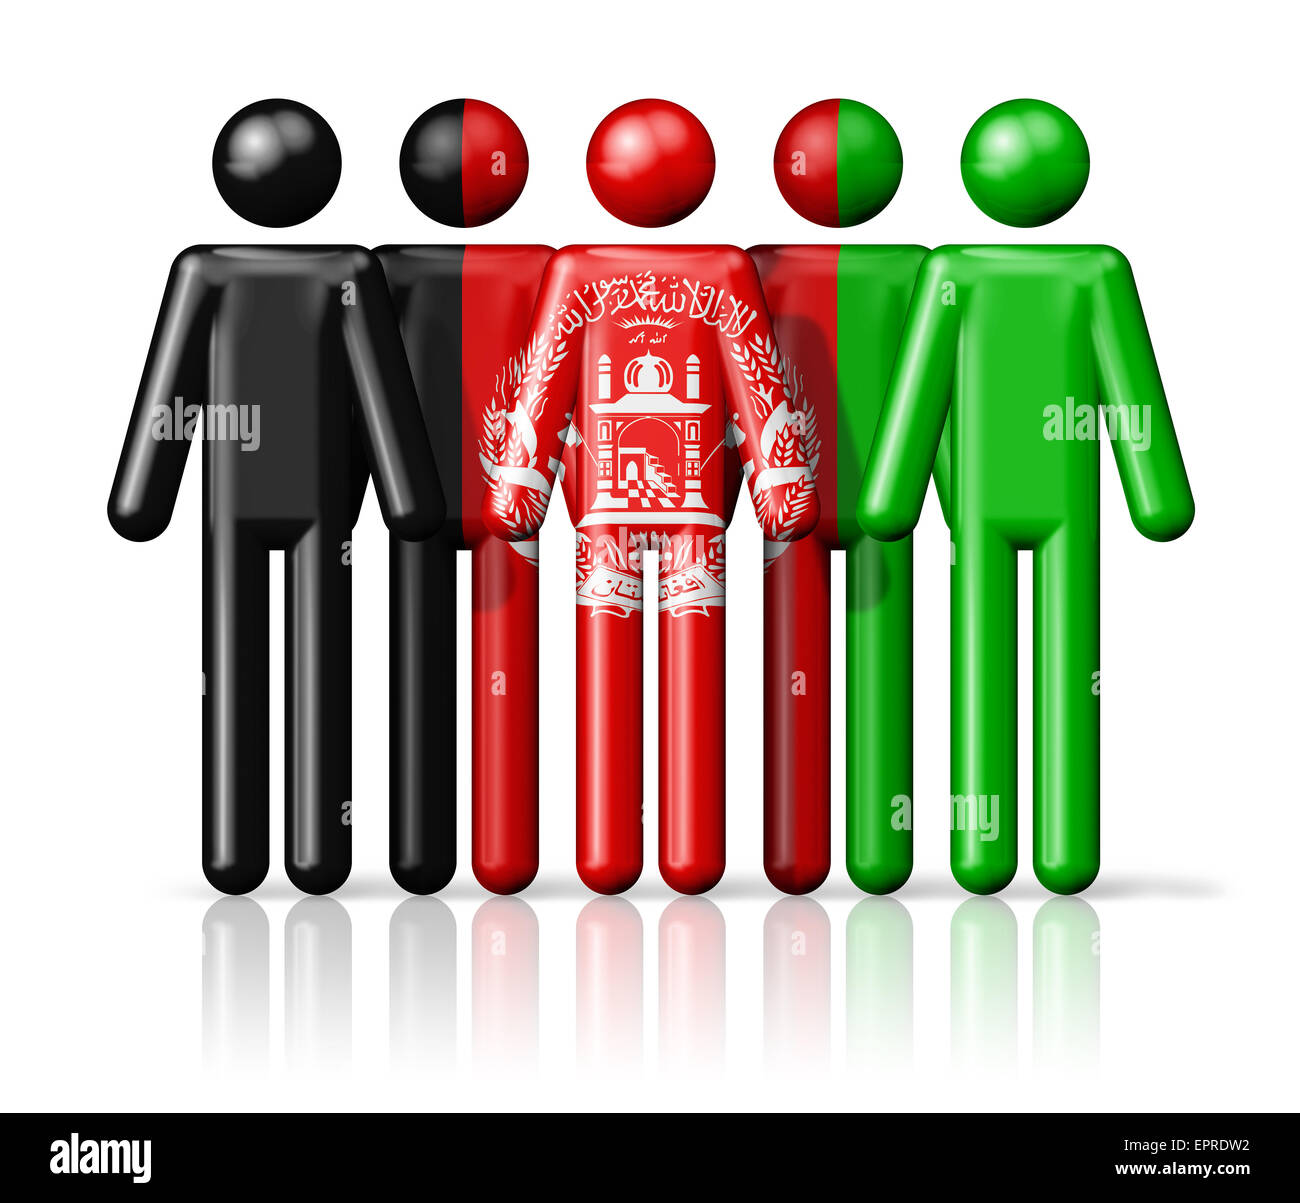 Flag of Afghanistan on stick figure - national and social community symbol 3D icon Stock Photo